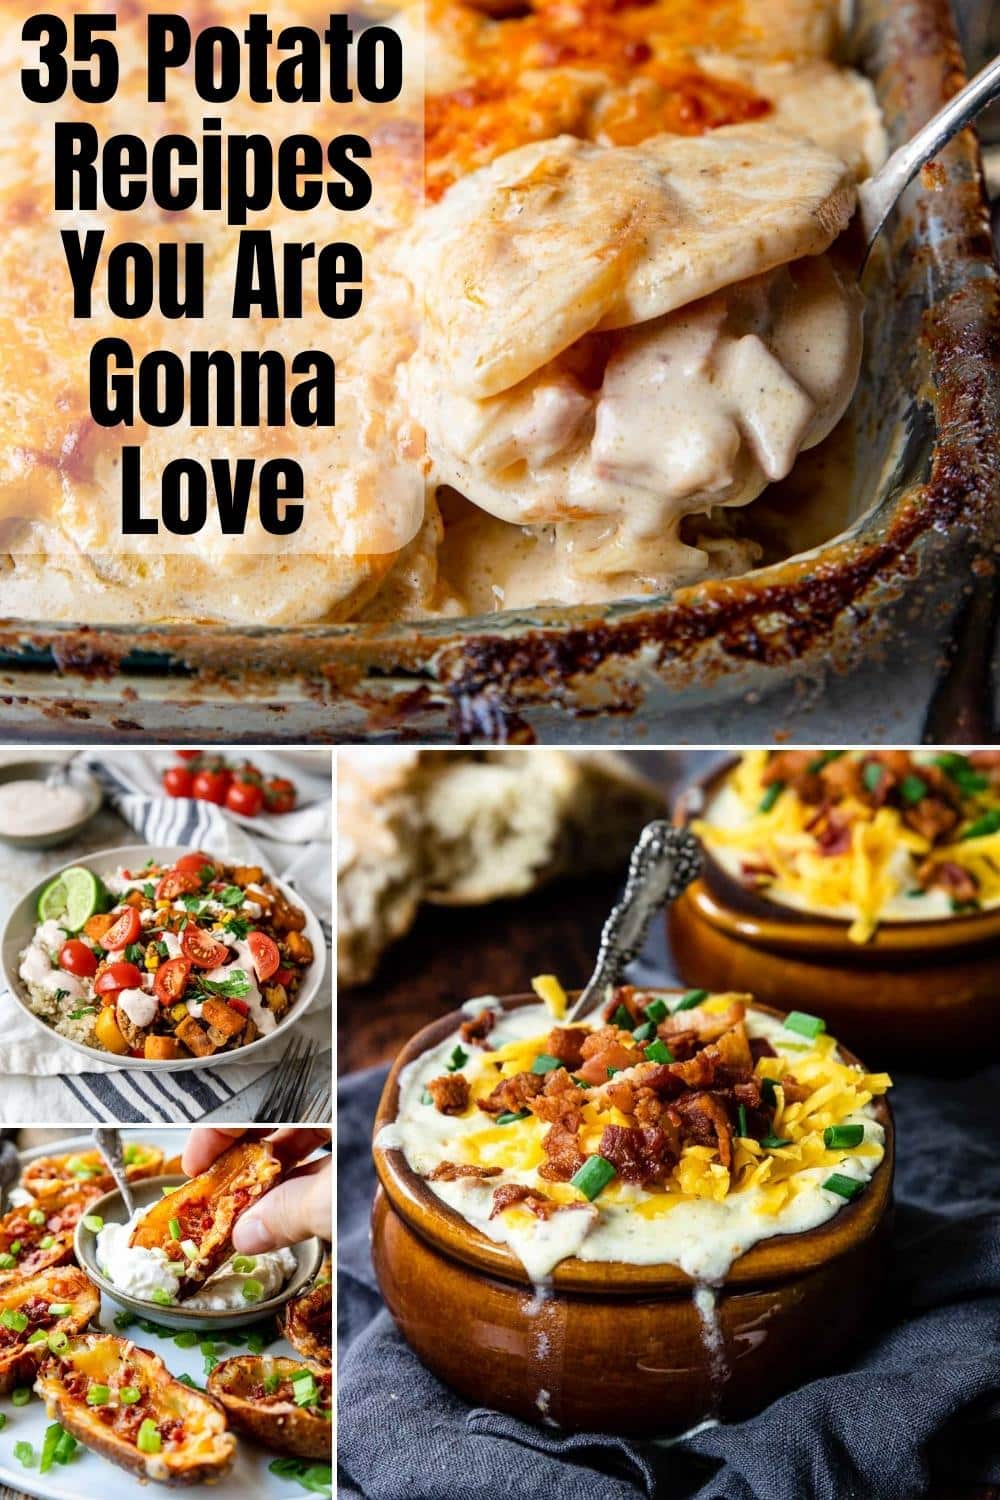 Multiple potato recipe photos on one image with text overlay for Pinterest